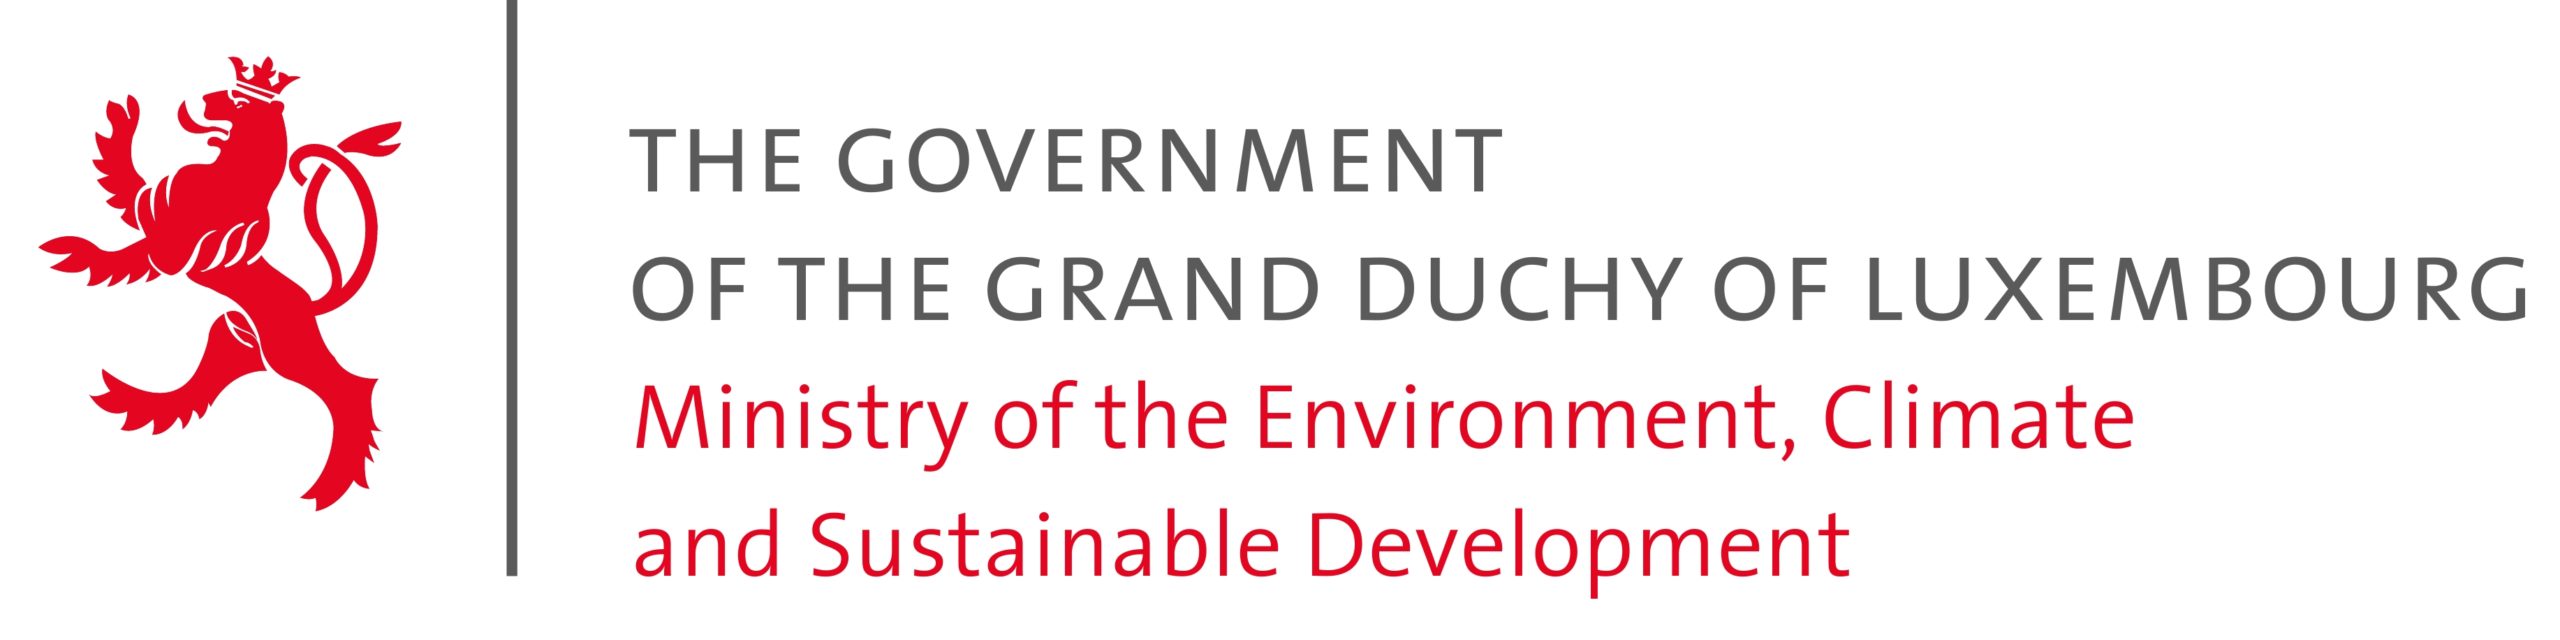 The Government of the Grand Duchy of Luxembourg: Ministry of the Environment, Climate and Sustainable Development